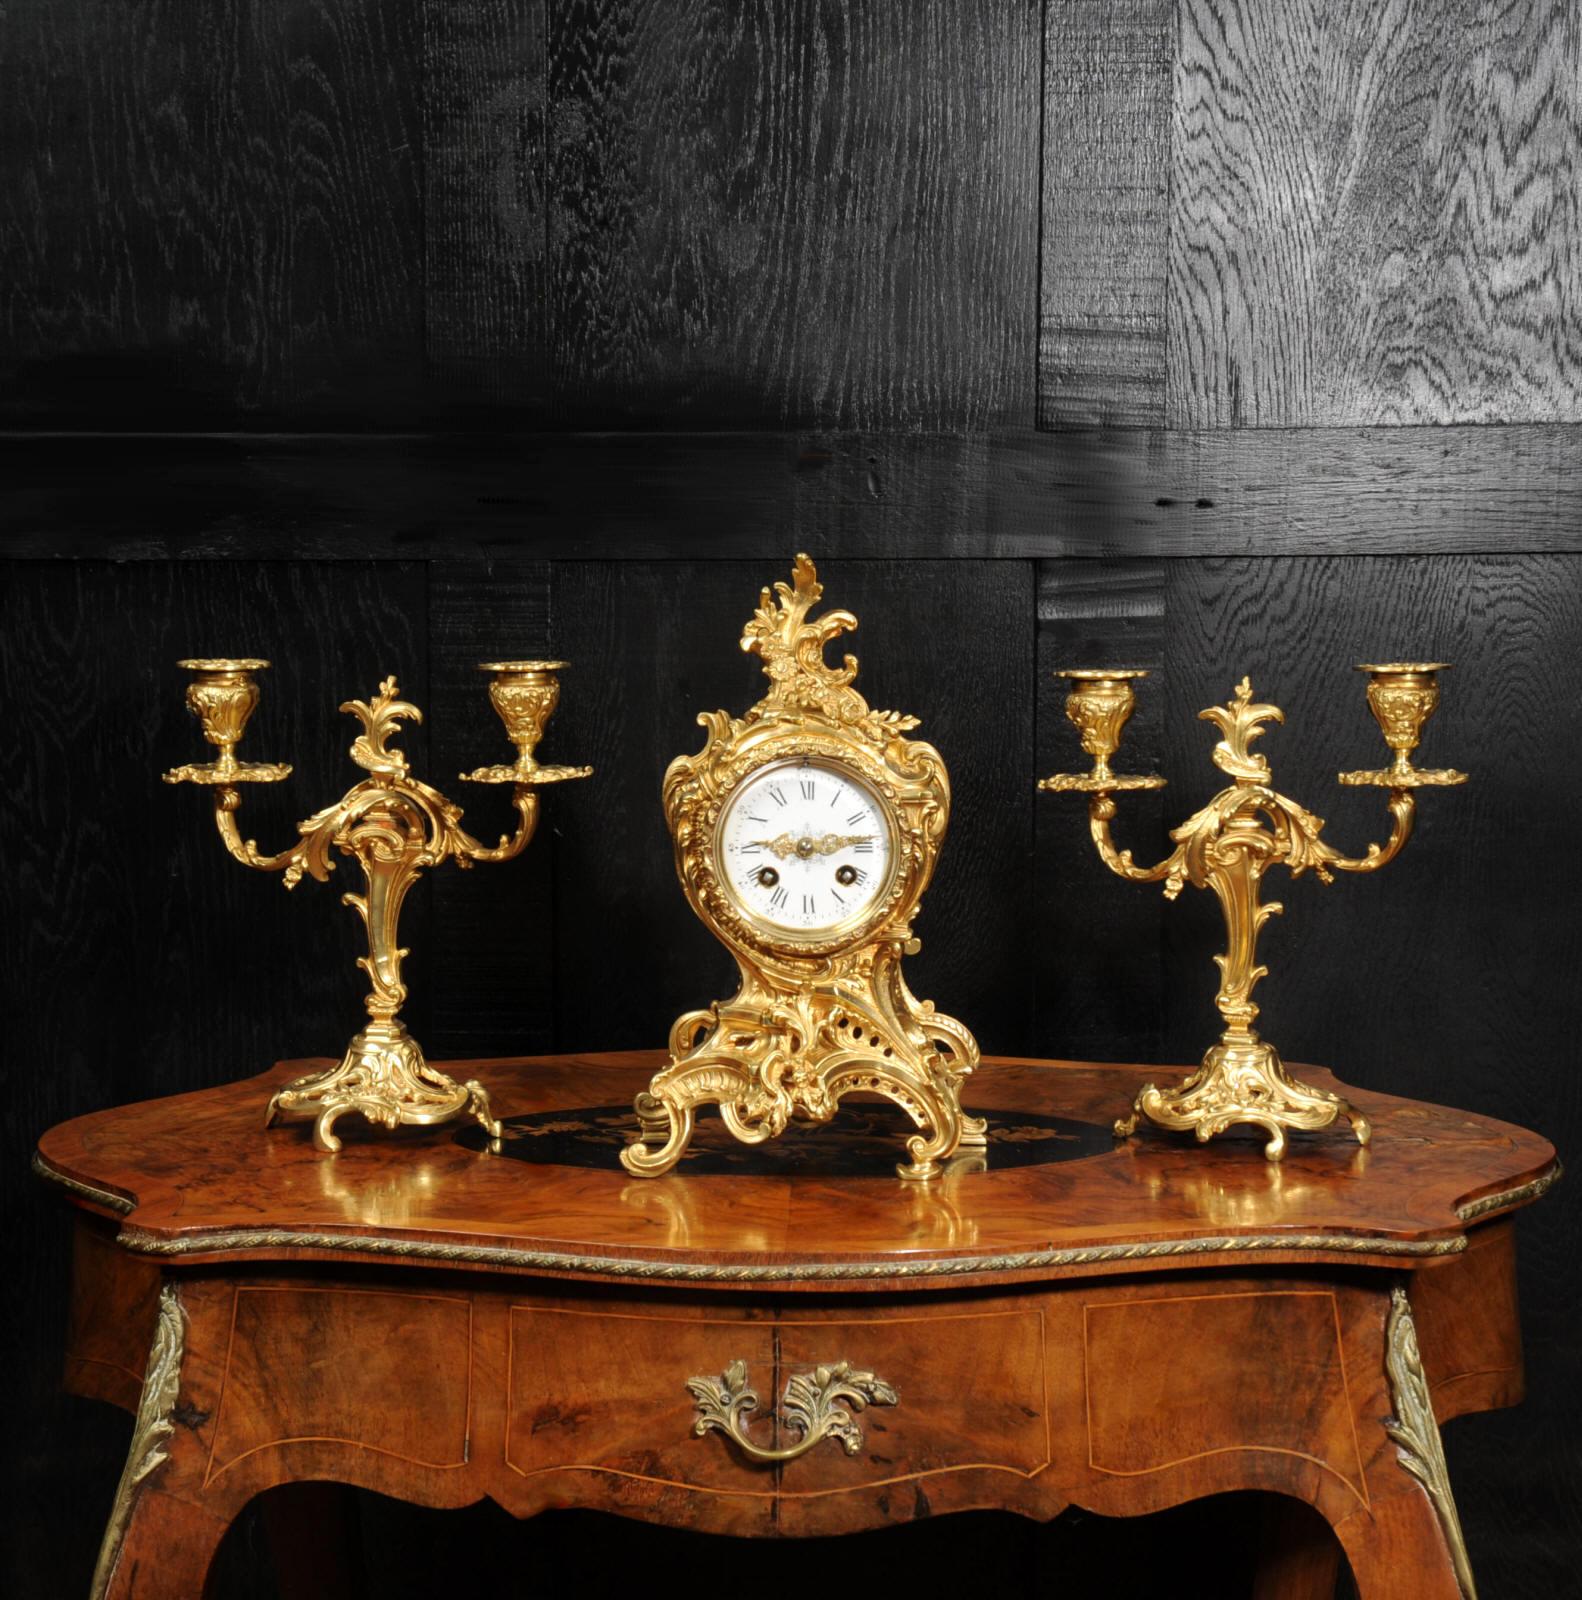 A beautiful original antique French Rococo clock set by Louis Japy. Finely modelled in gilt bronze with a waisted case, formed of asymmetric scrolls with floral swags and a Rococo flourish to the top. Candelabra are conforming in style and have